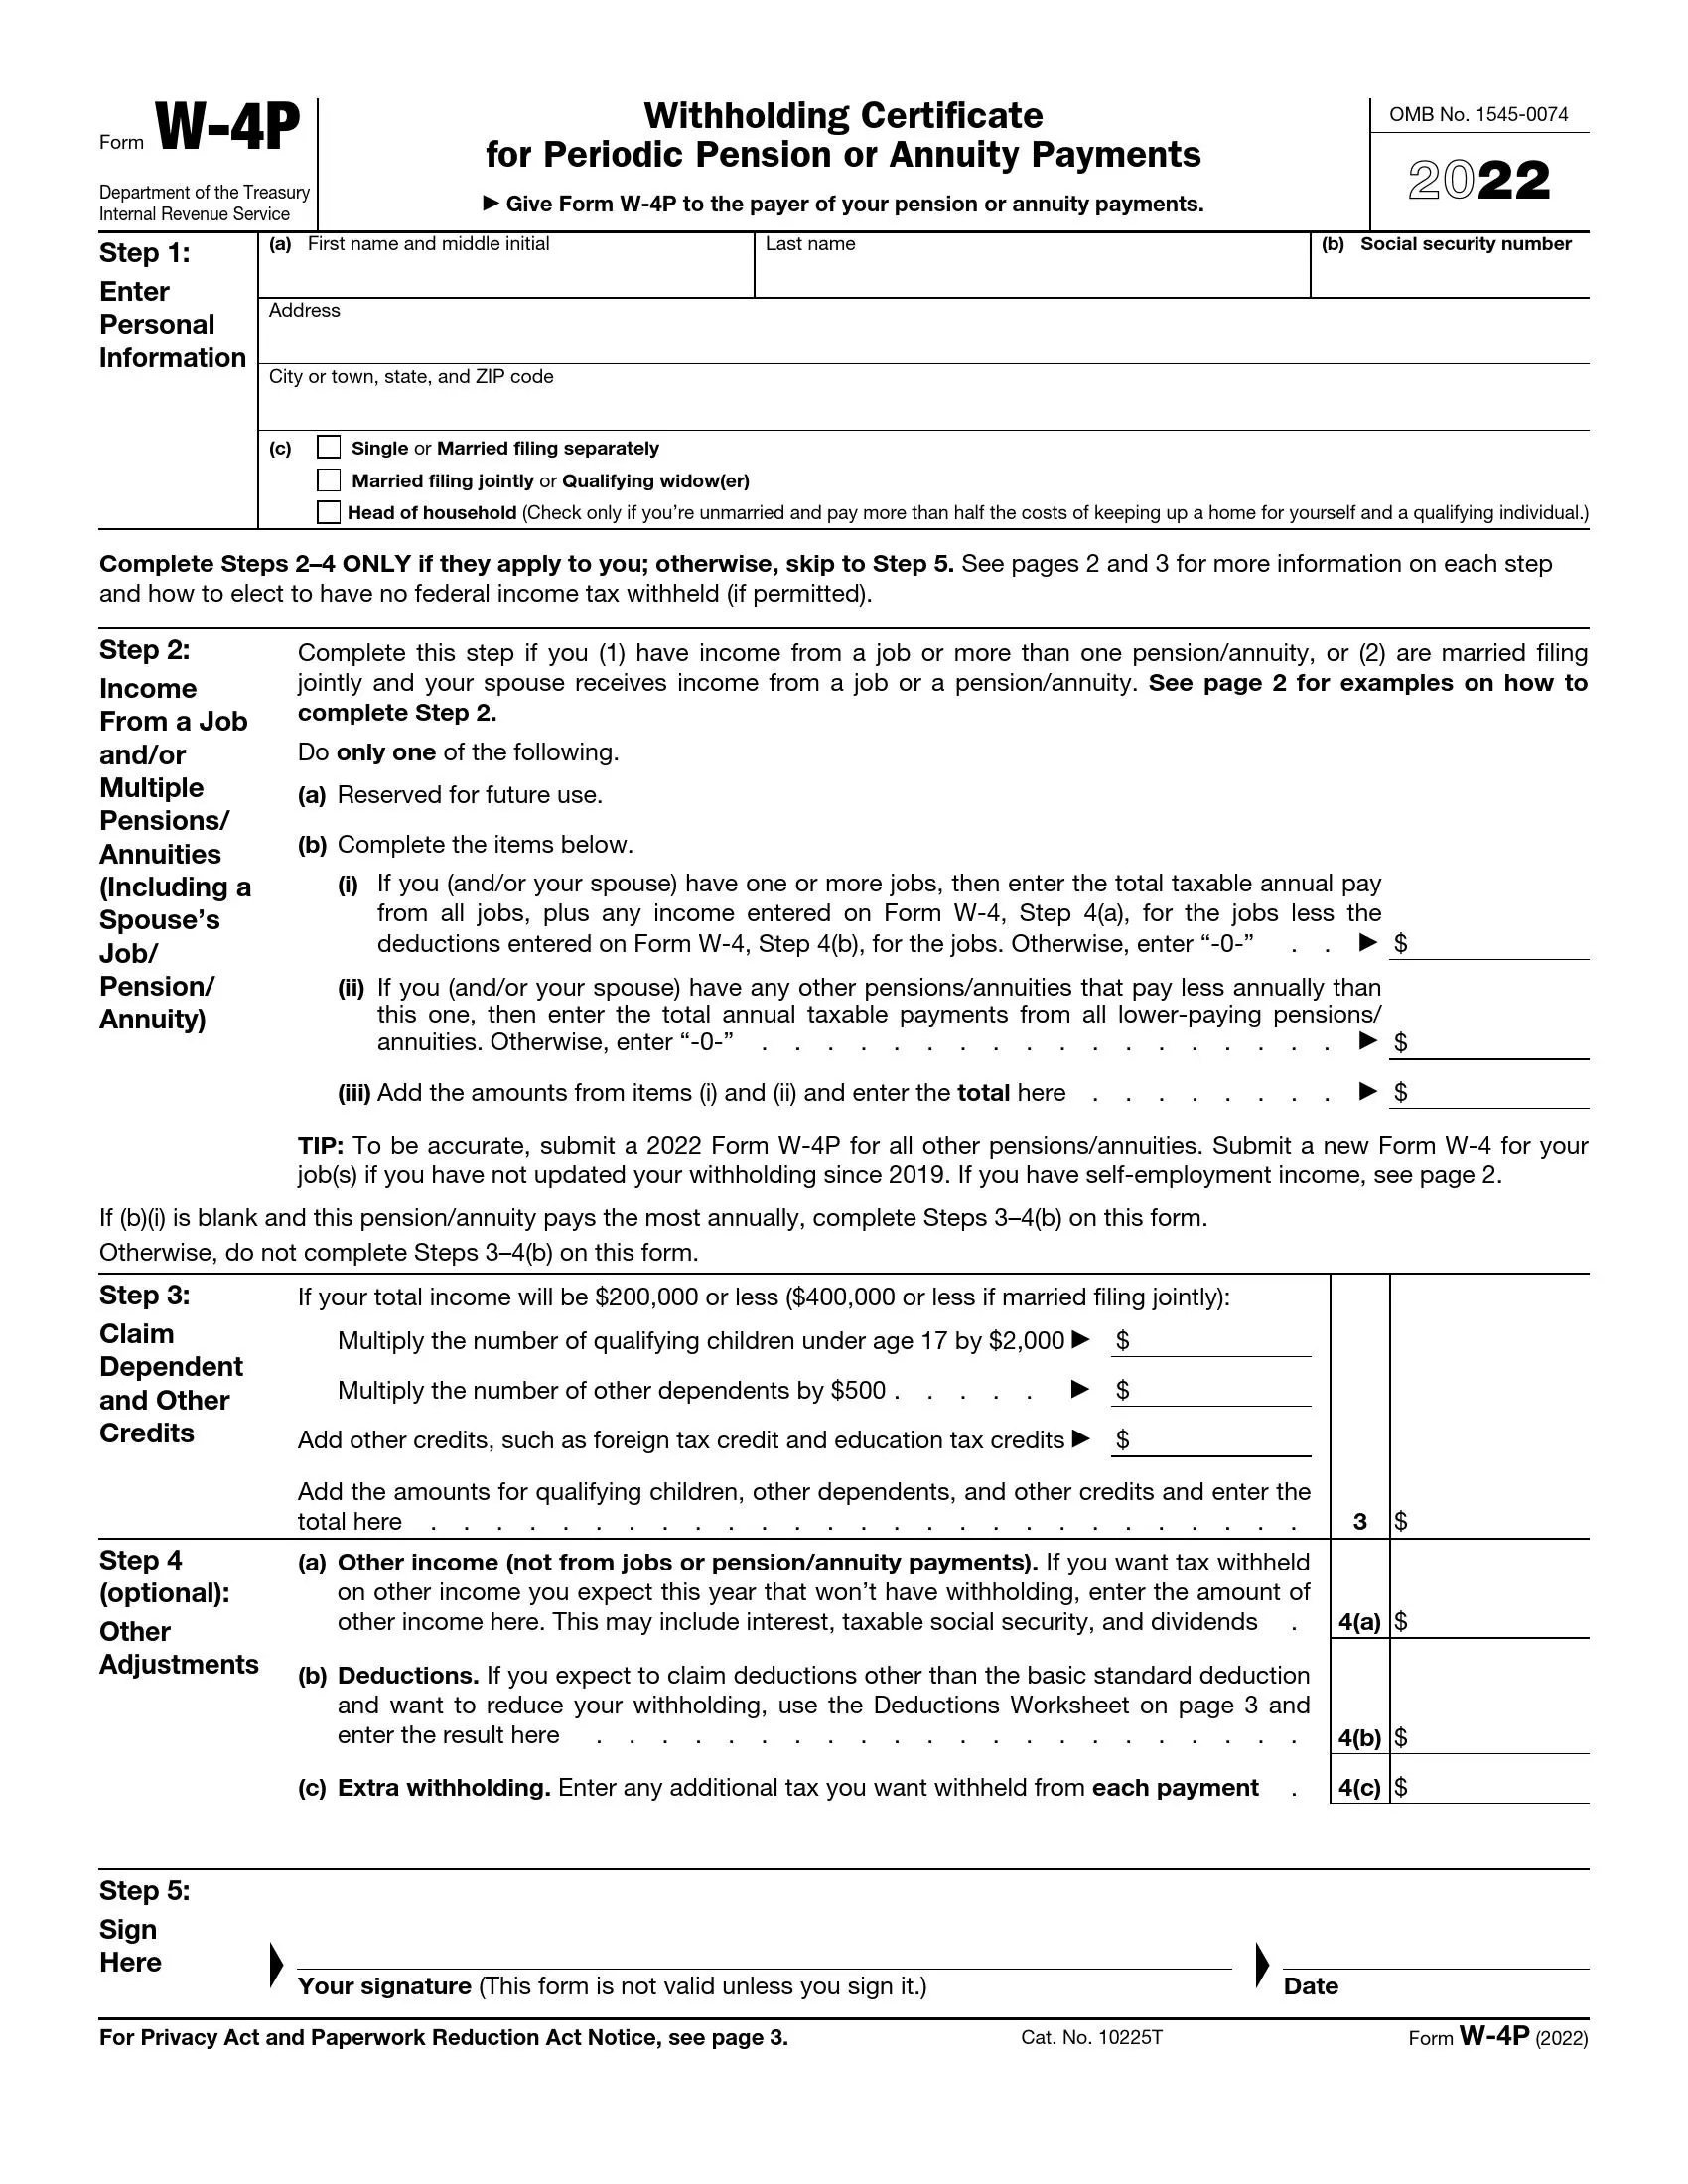 irs form w-4p 2022 preview